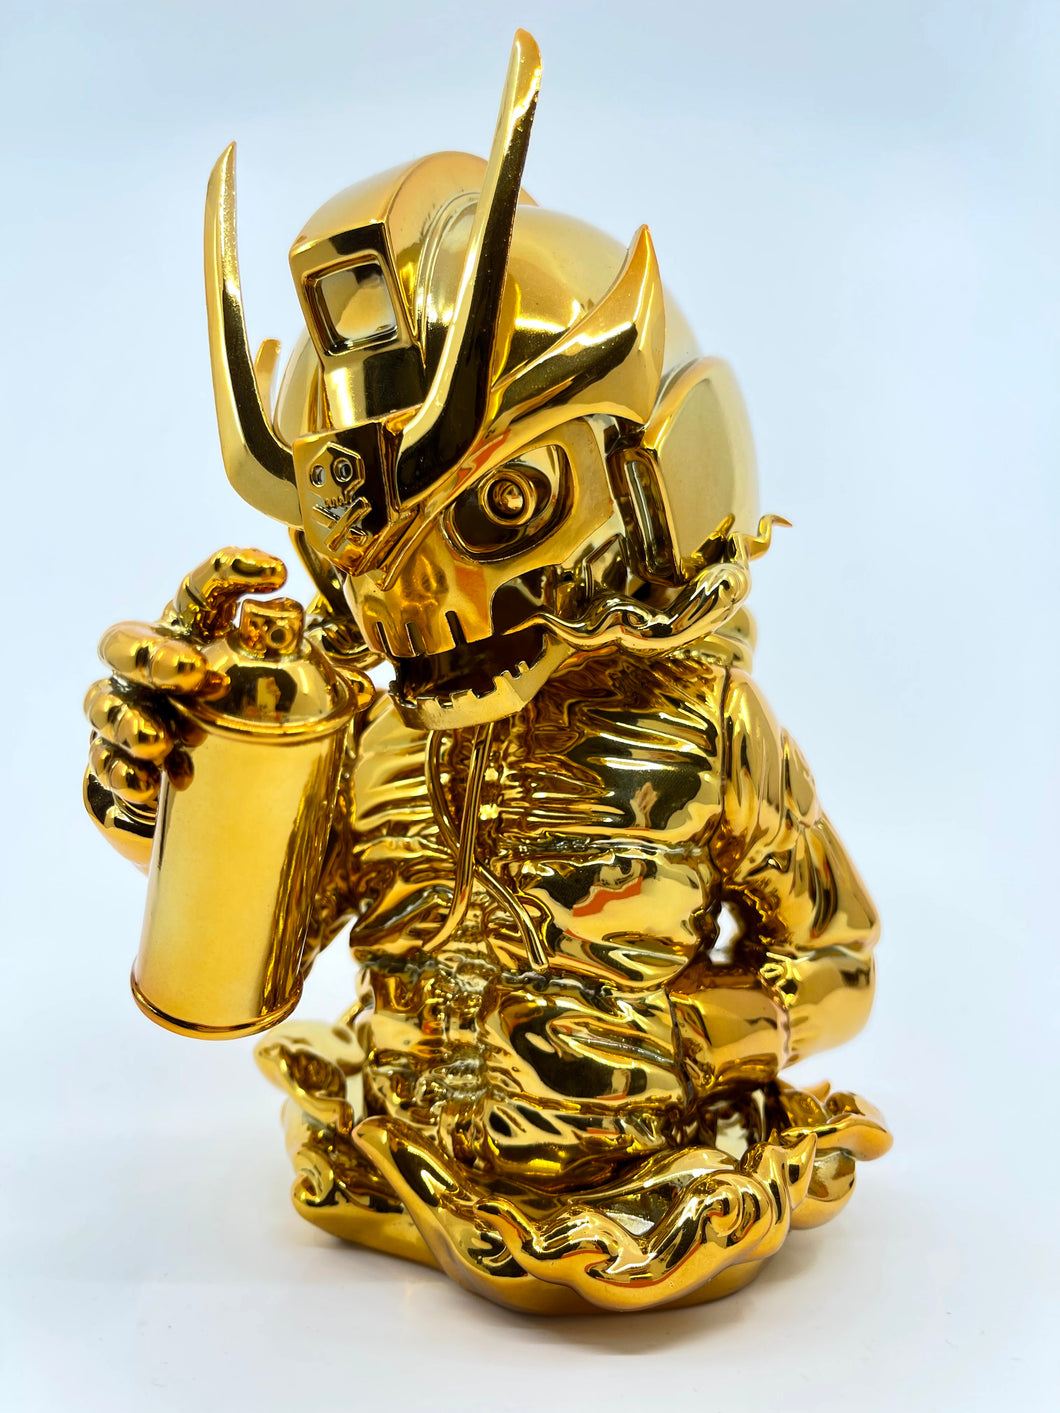 TEQ63 Ravager Gold Chrome God Mode  (Hidden Fortress)  - Martian Toys by Quiccs